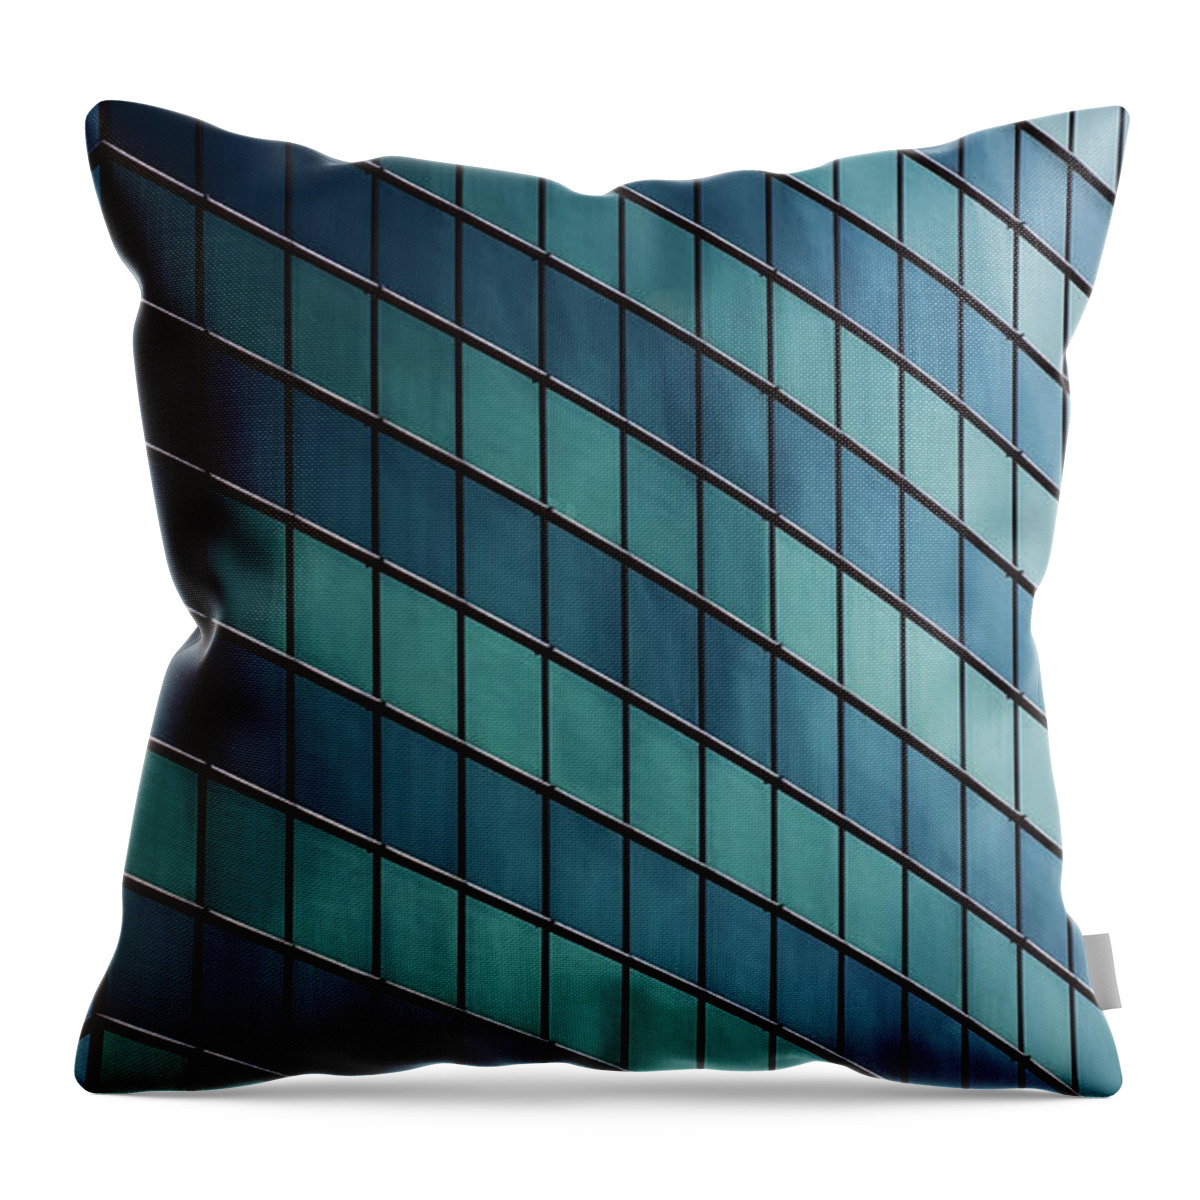 Outdoors Throw Pillow featuring the photograph Curving Facade Of Skyscraper by Photo By John Crouch